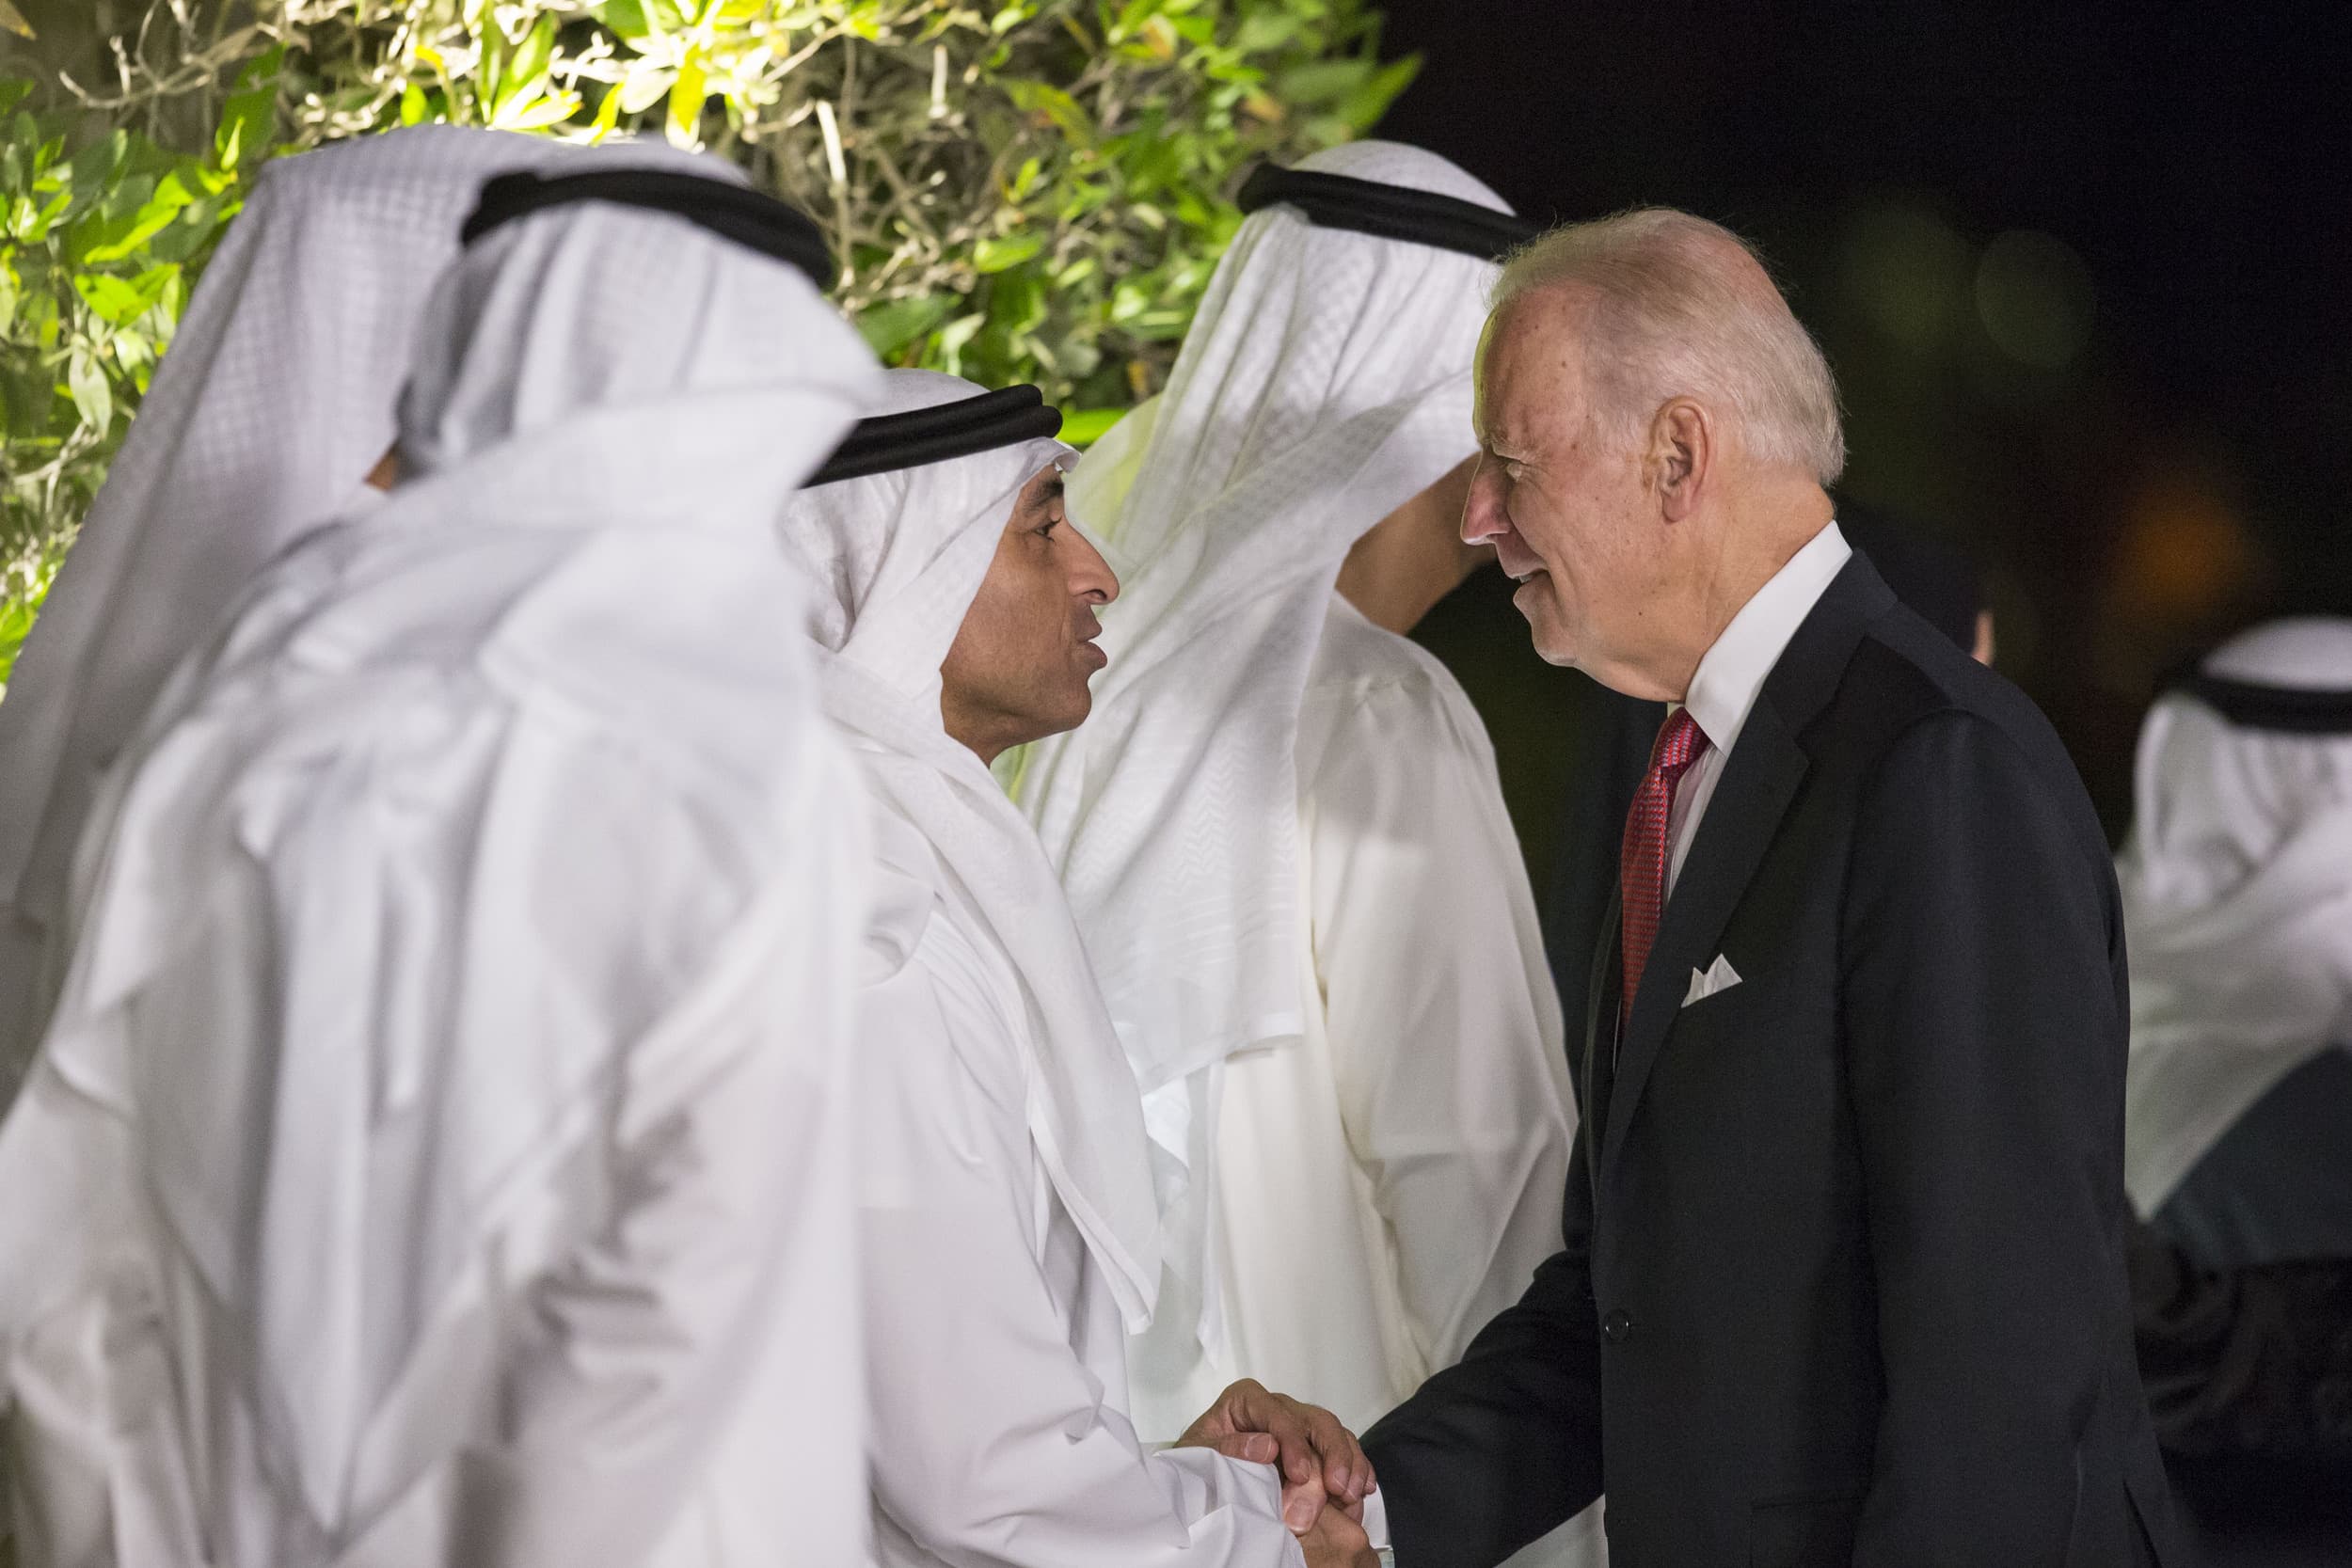 United States Vice President Joe Biden (pictured with Yousef Al Otaiba, UAE Ambassador to the United States) conducted a two-day visit to the UAE, which underscored the strong bilateral relationship between the two countries. During the visit, the US Vice President called the bond between the UAE and US "one of the most significant in the region" and highlighted the UAE's role in the fight against ISIL and extremism. 